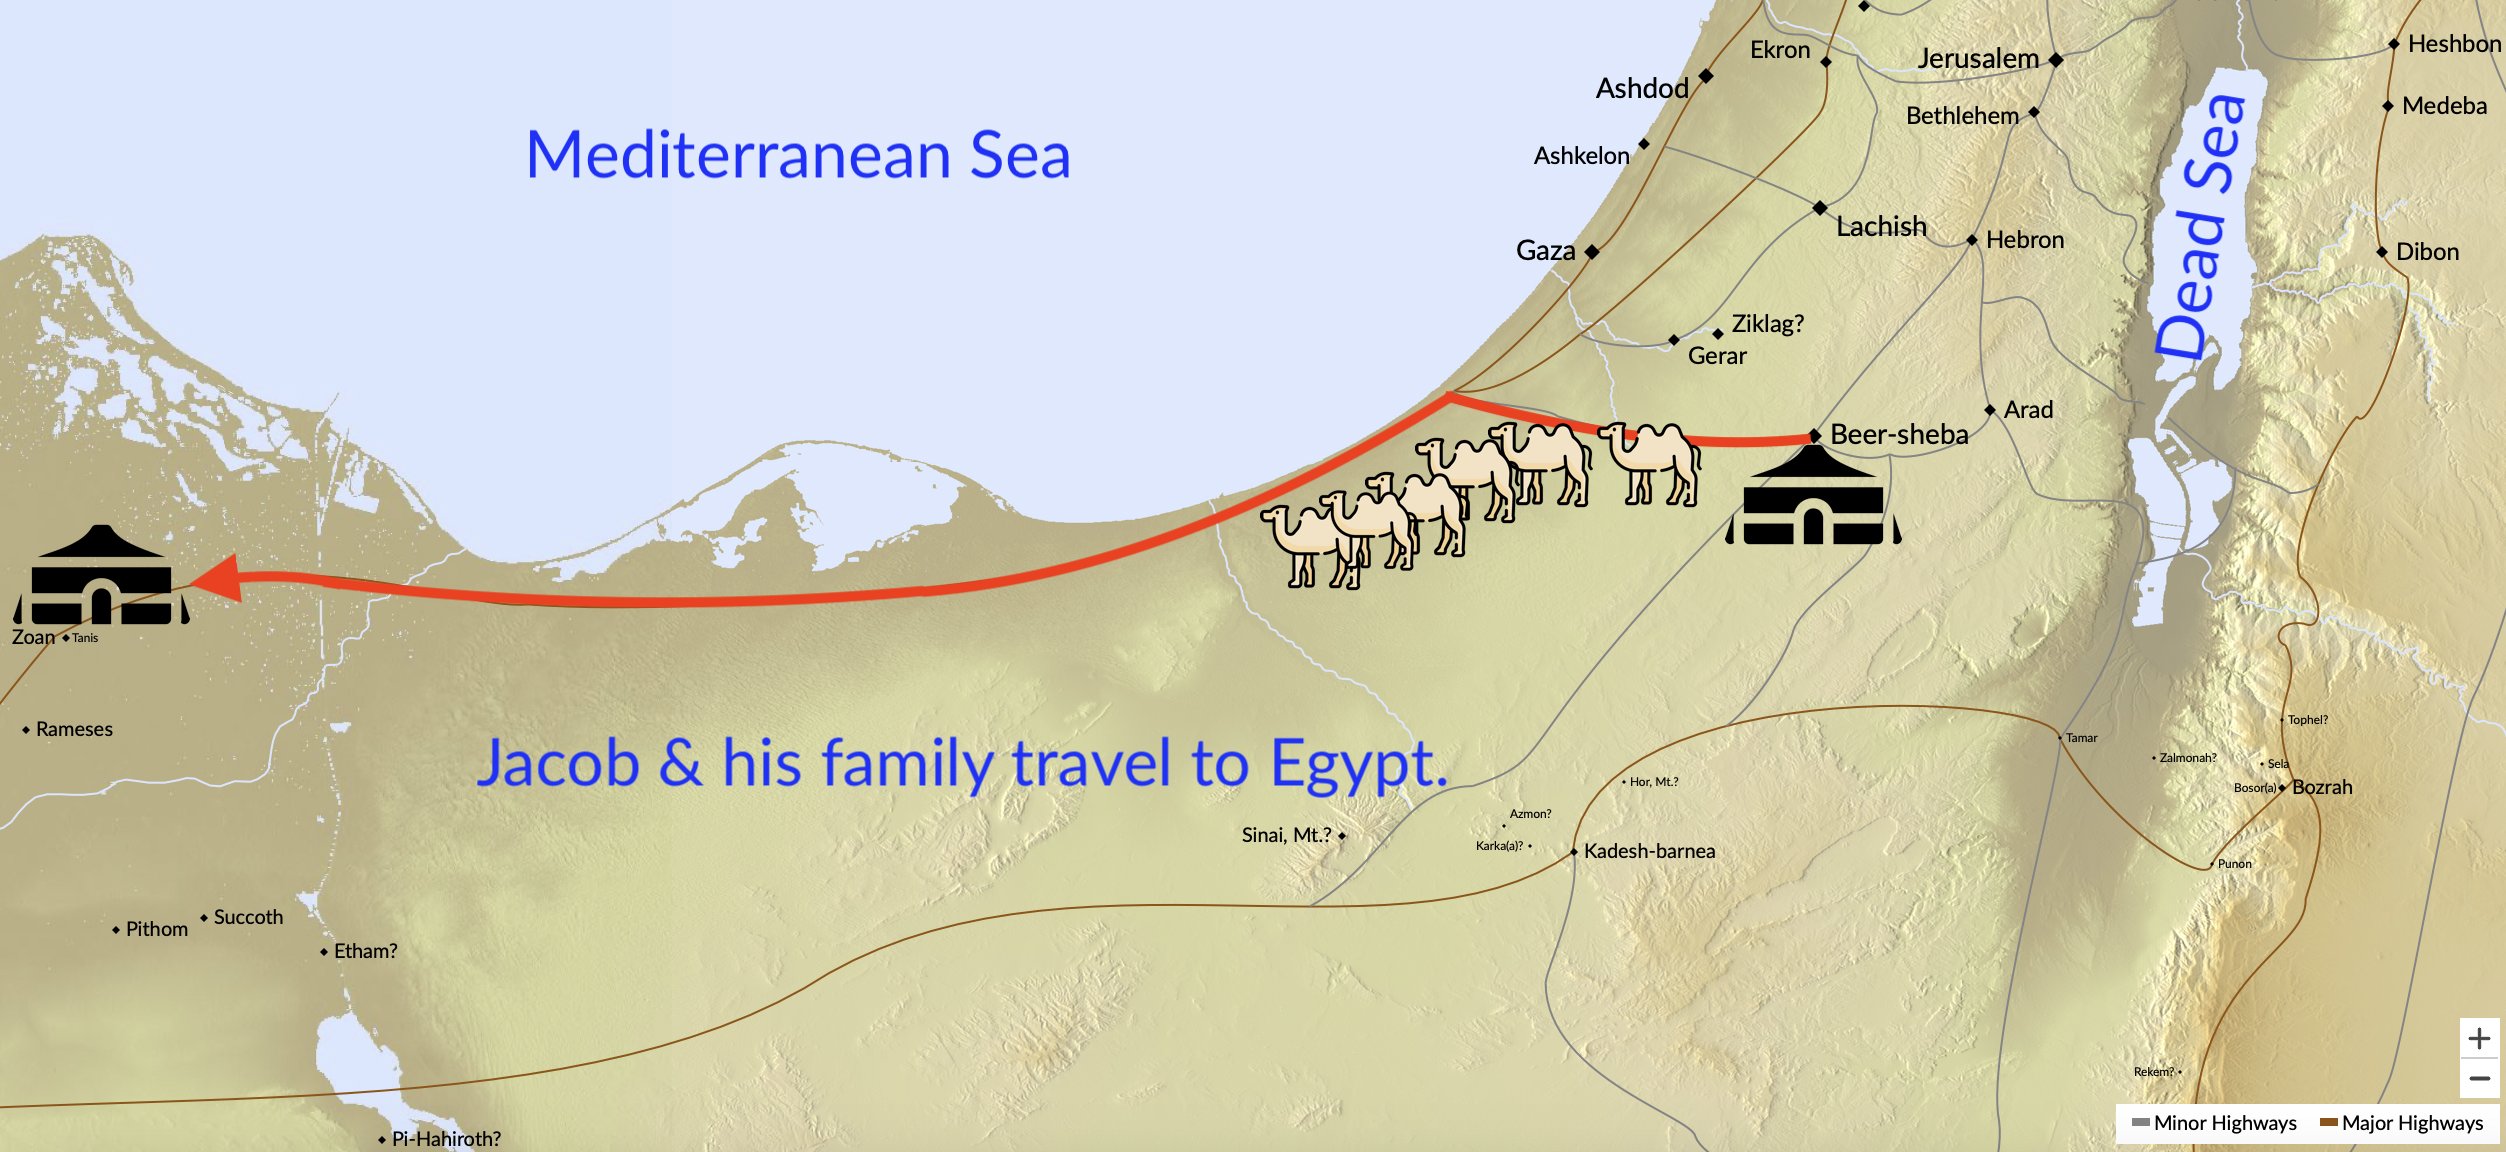 Jacob and his family migrate to Egypt to reunite with Joseph.